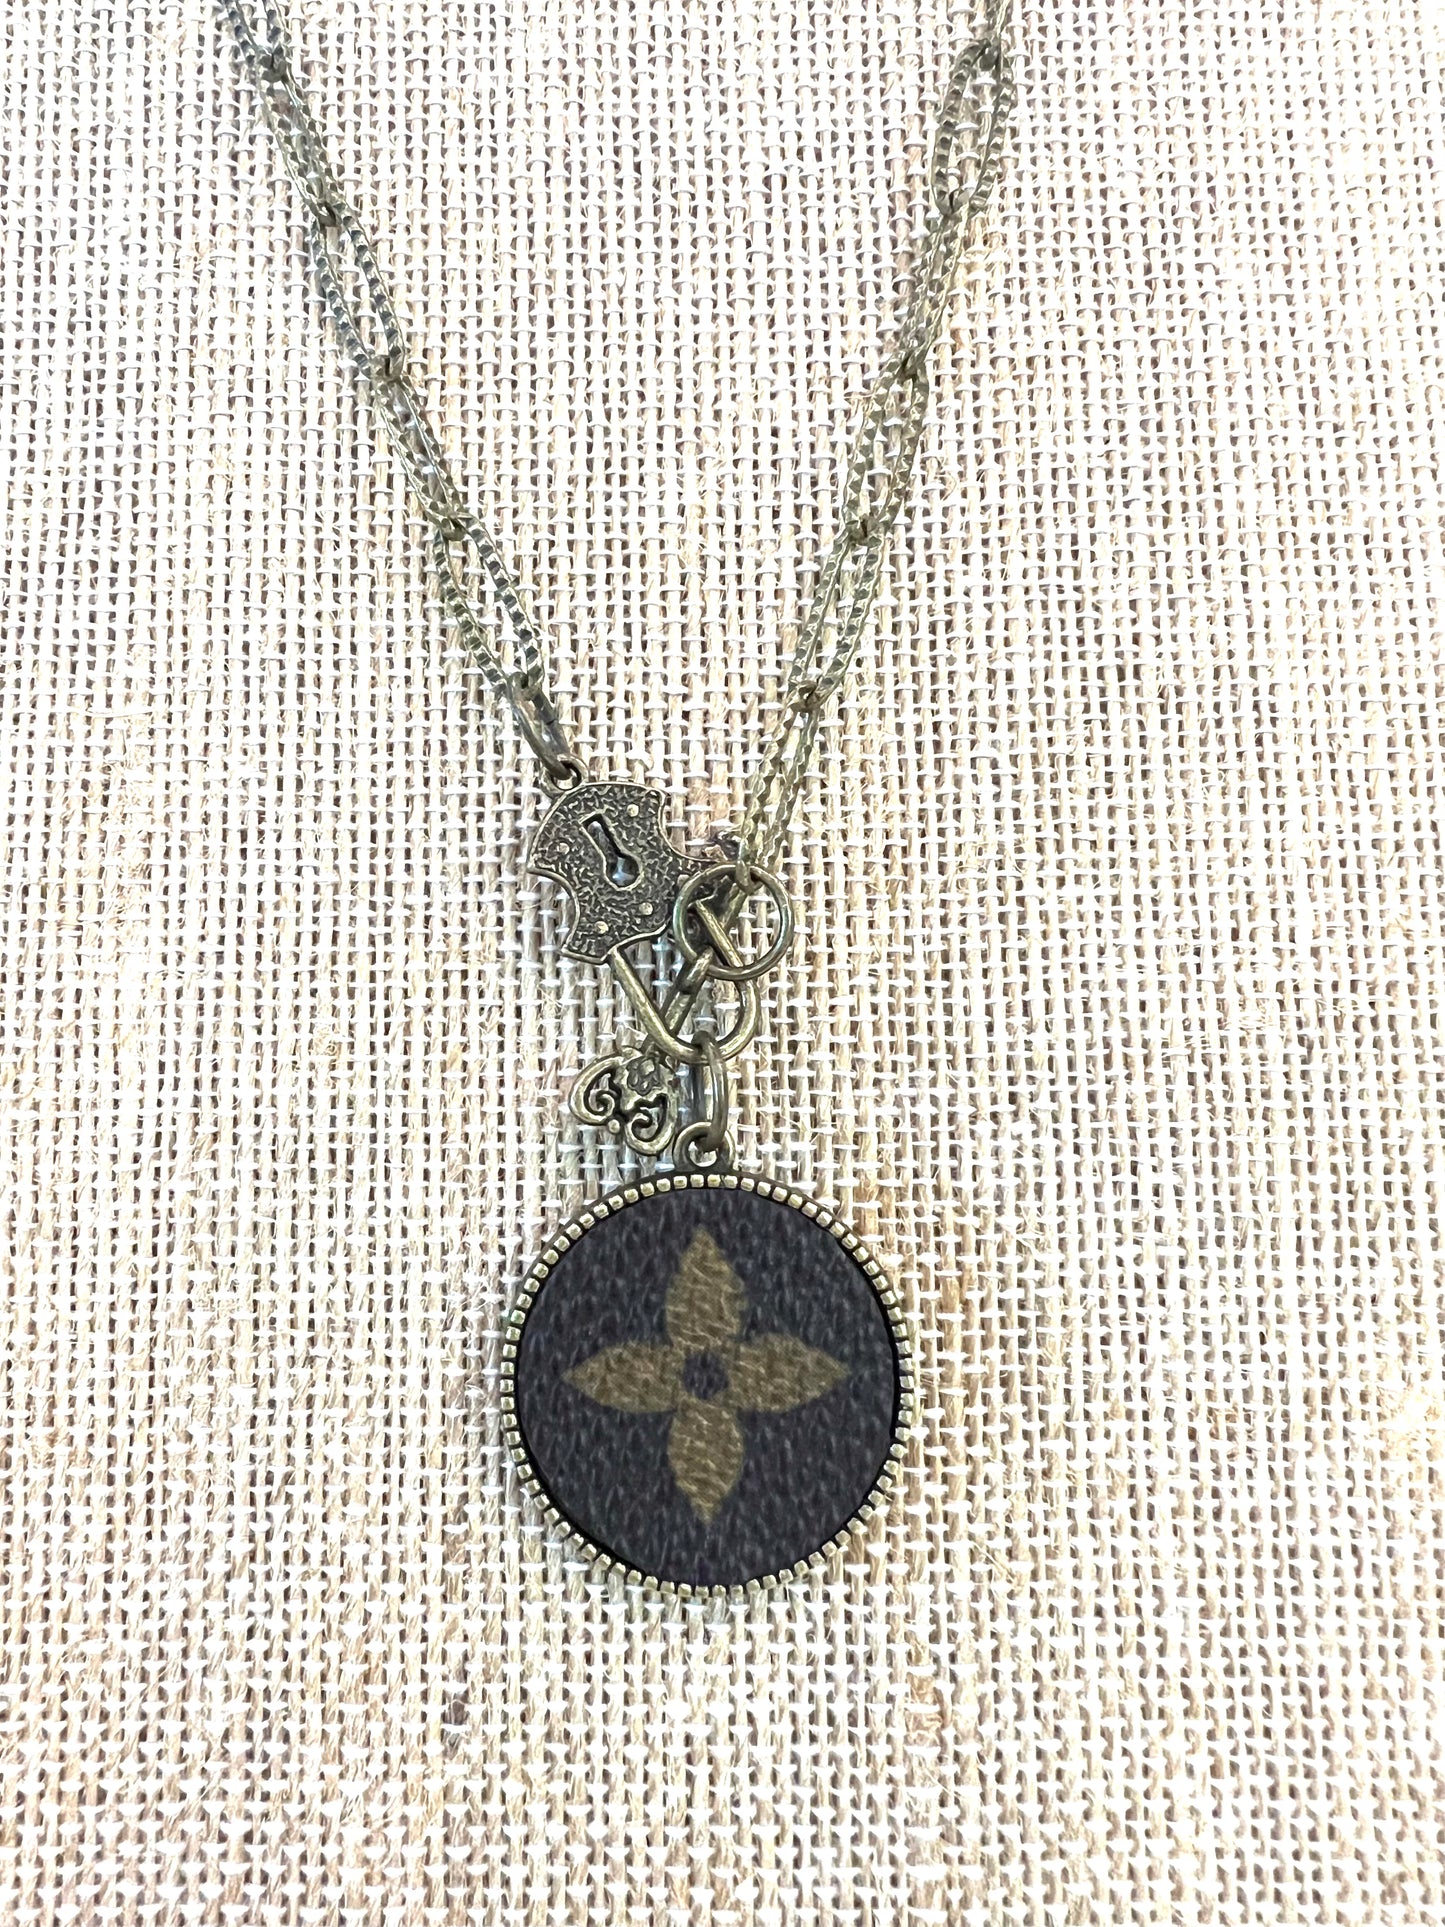 LV Again -Lock and Key Necklace